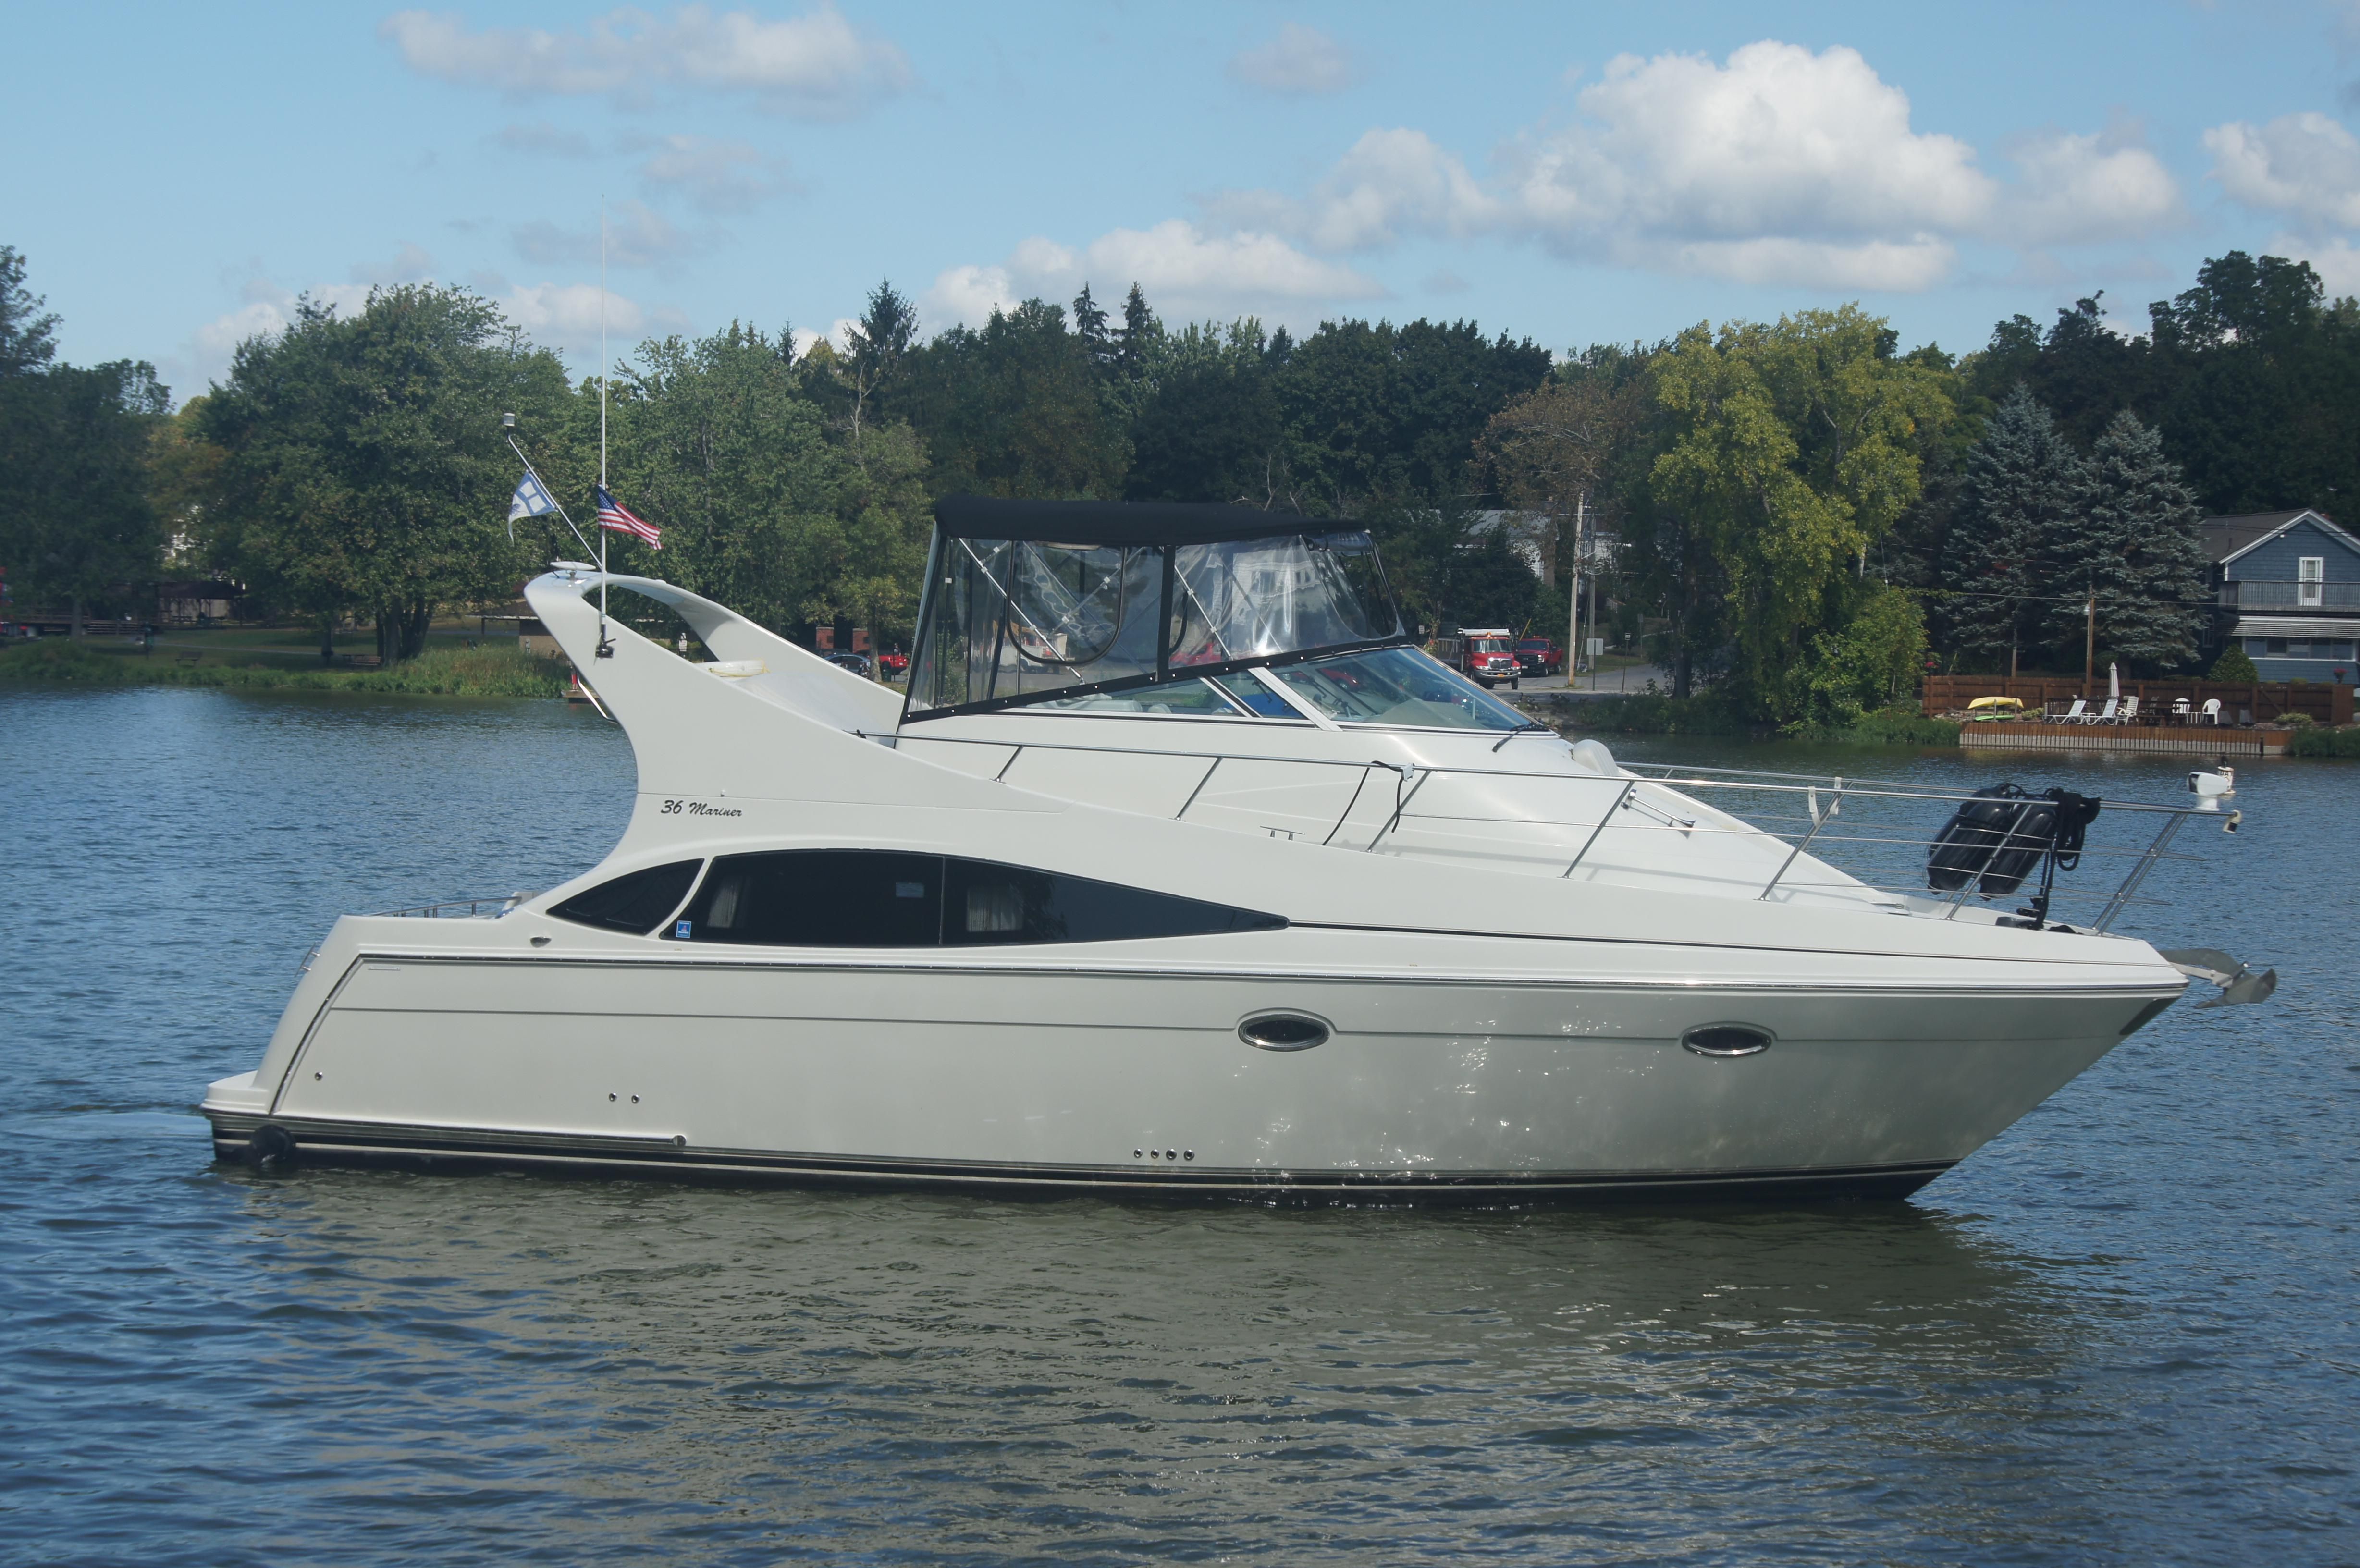 36 ft motor yacht for sale